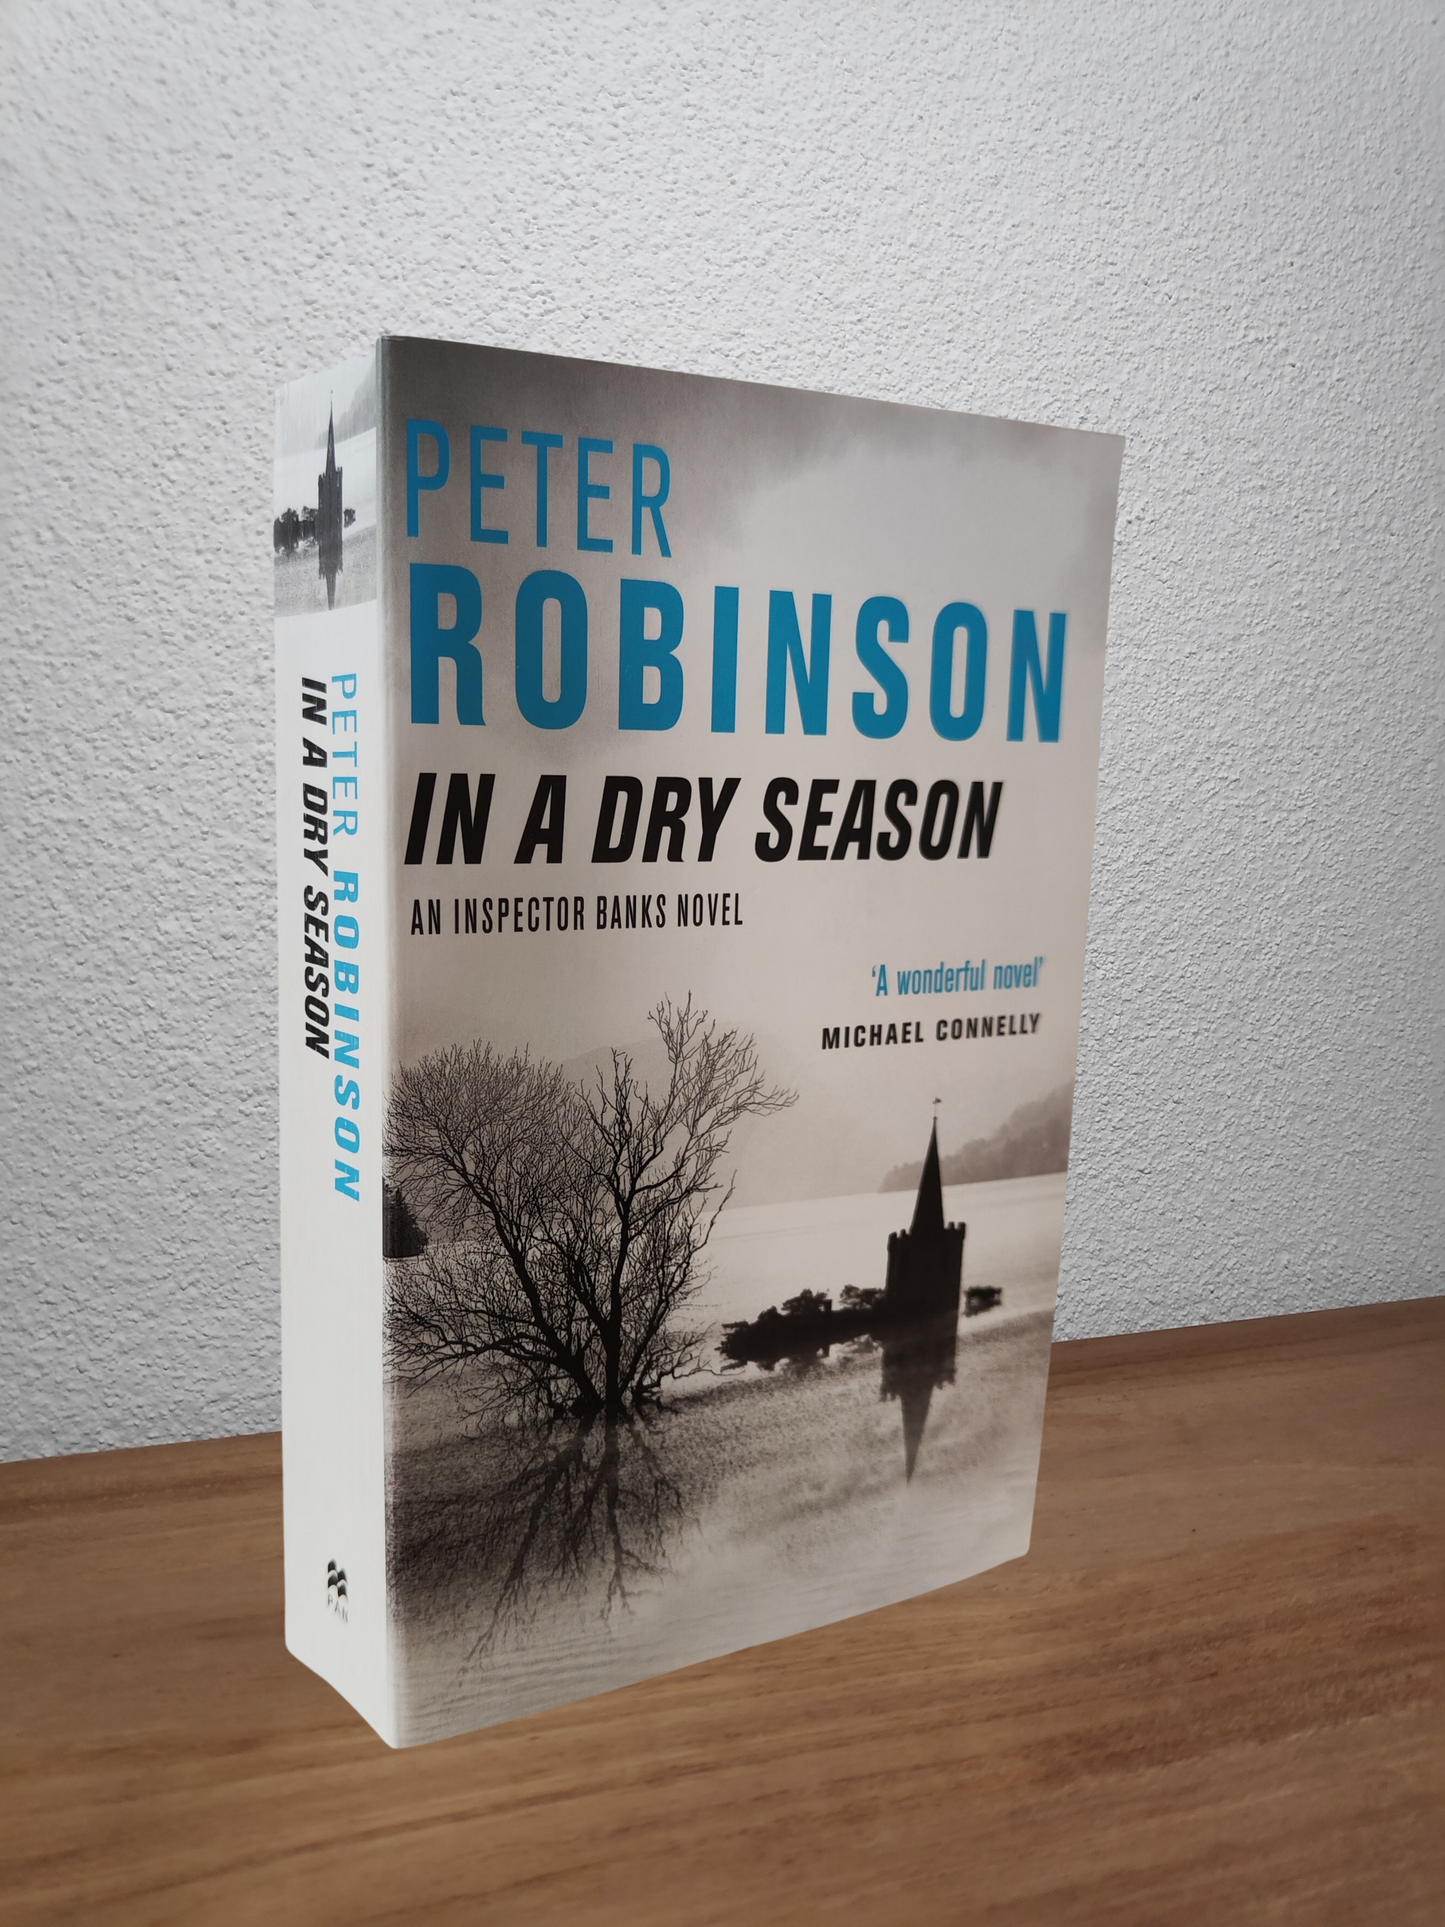 Peter Robinson - In a Dry Season (Inspector Banks #10)